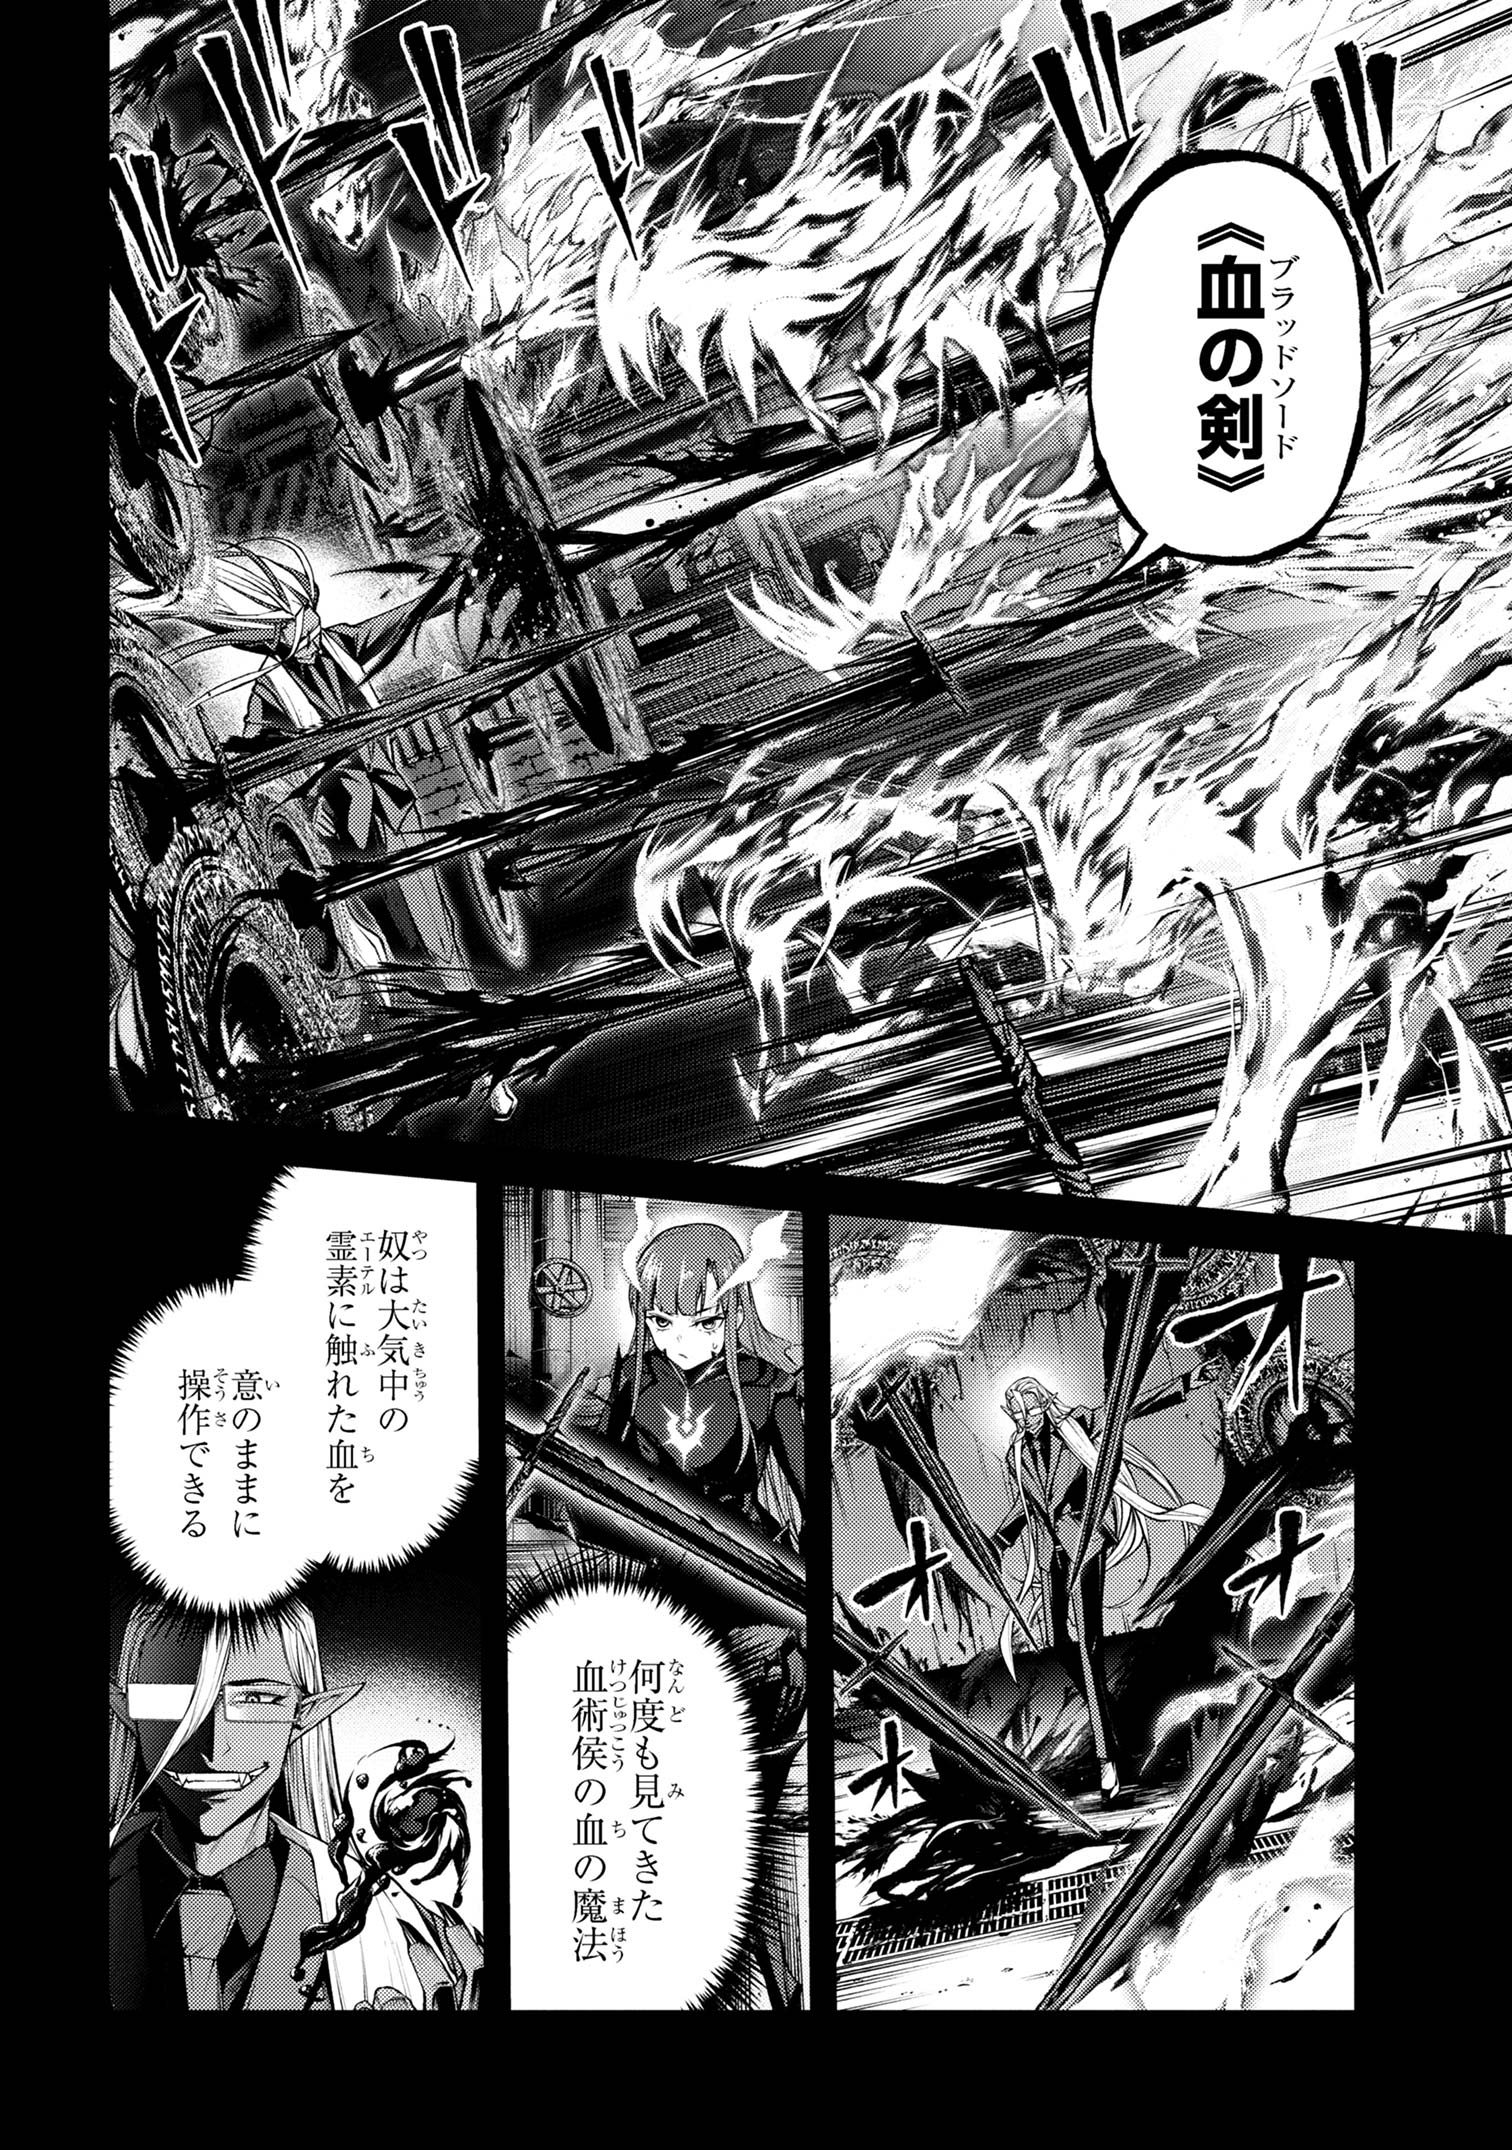 Maou 2099 - Chapter 8.2 - Page 2